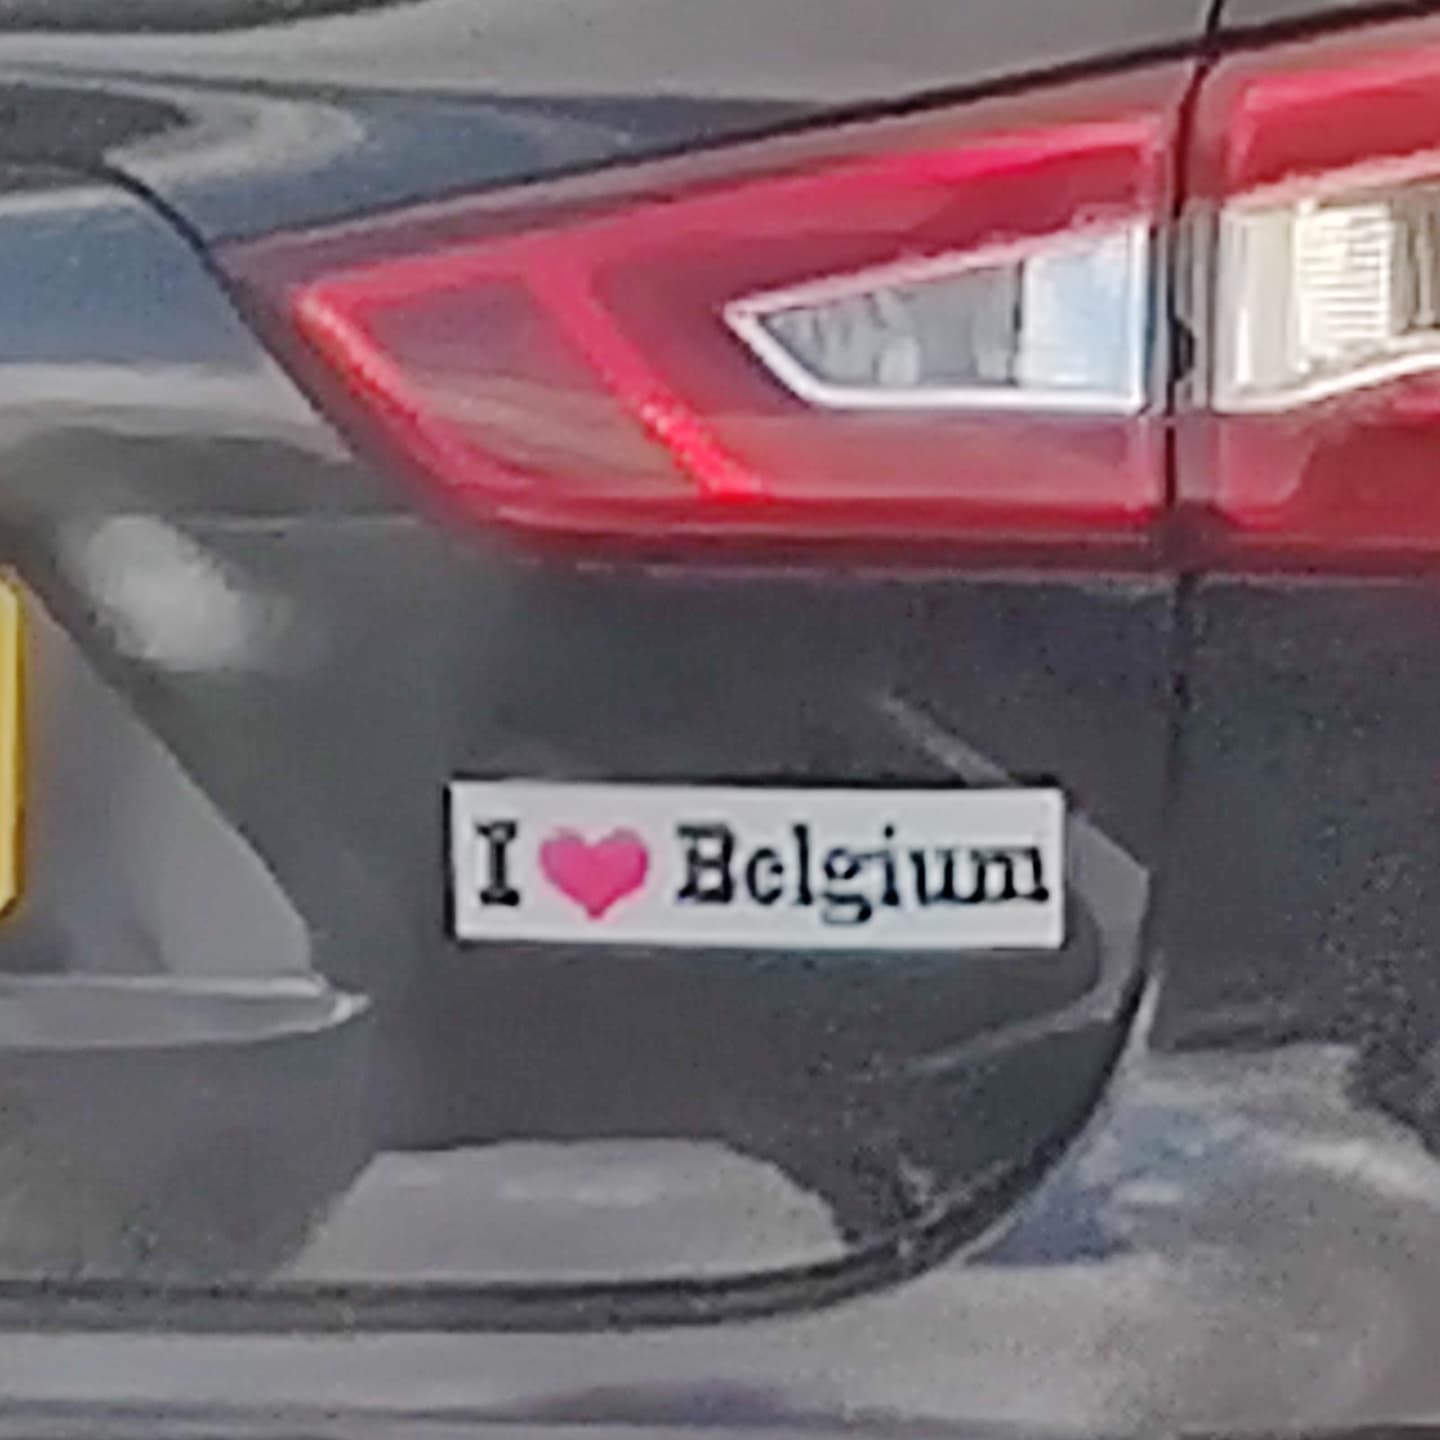 I mean, it's not that I thought I'd already seen *everything*. But I wasn't expecting THAT. #belgiumman